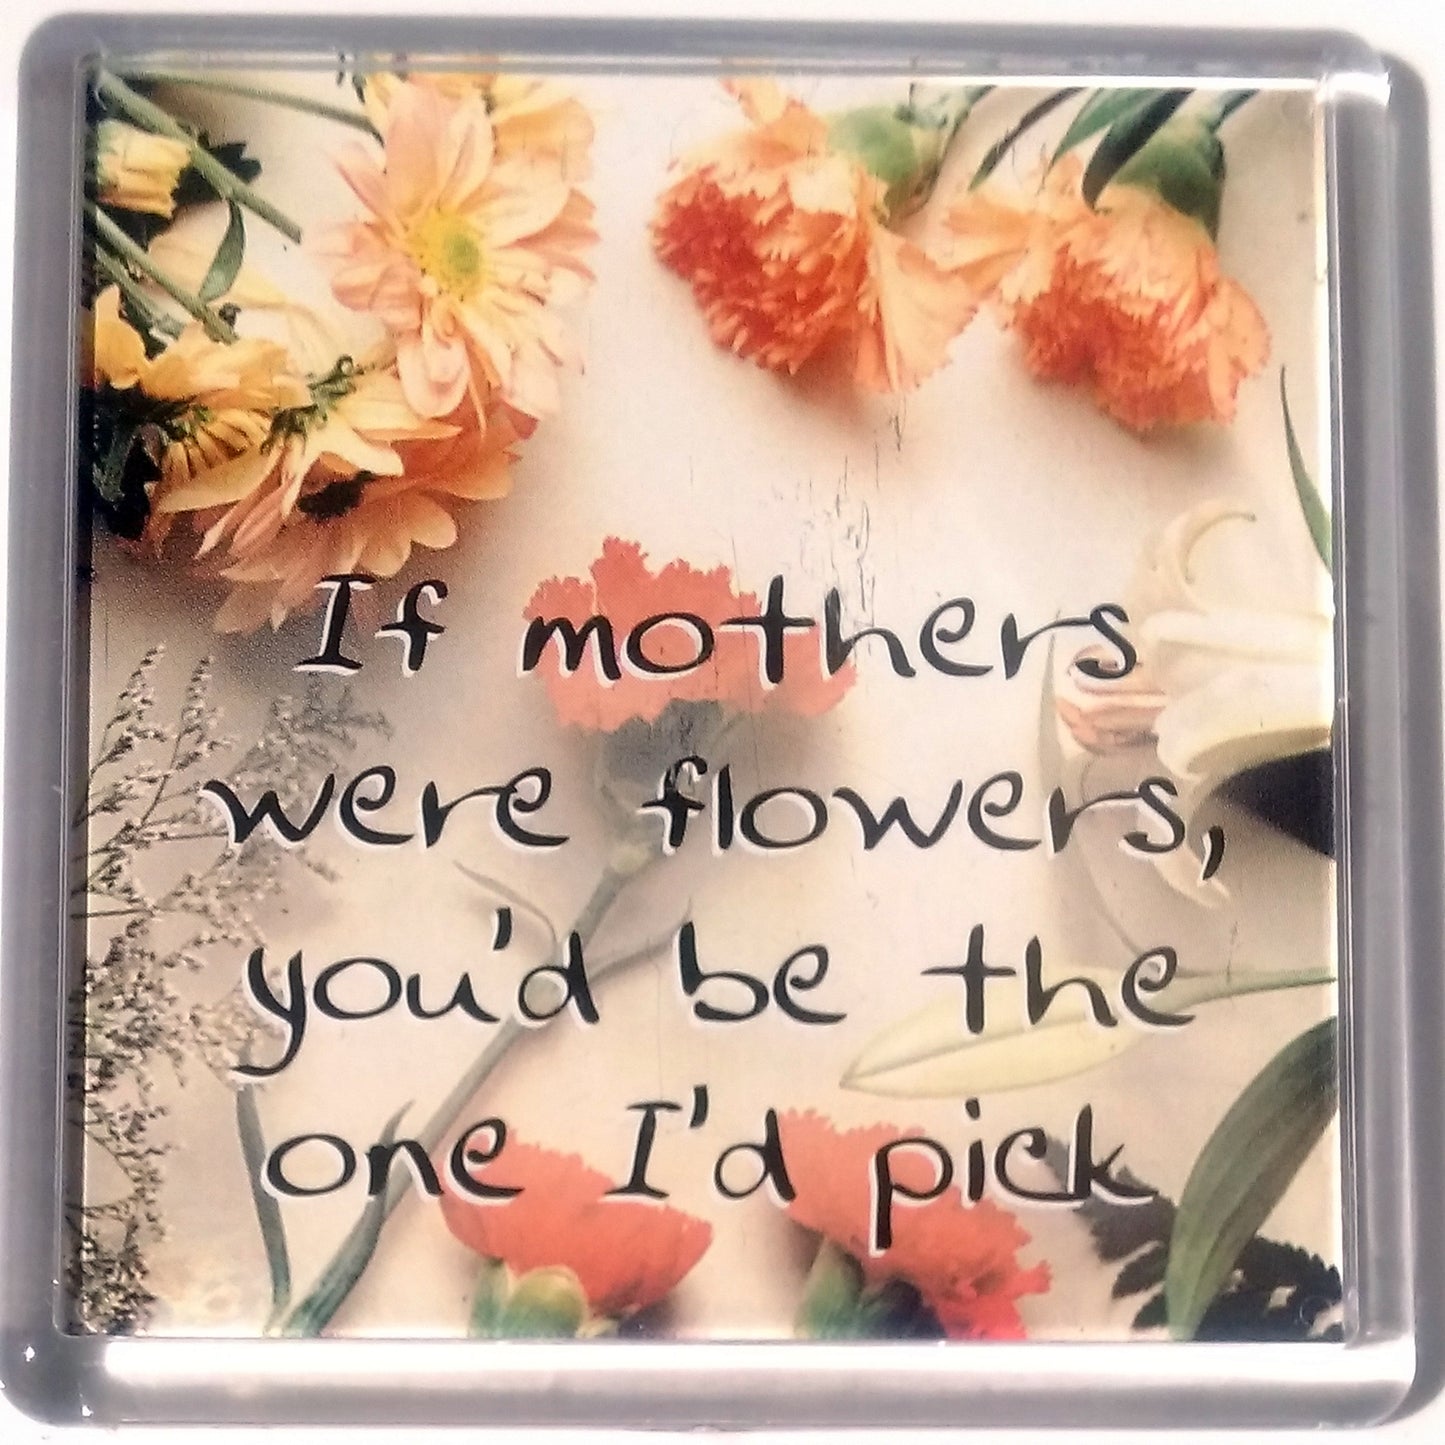 History and Heraldry Sentiment Fridge Magnet - Family MAG-021 / If mothers were flowers you'd be the one I'd pick